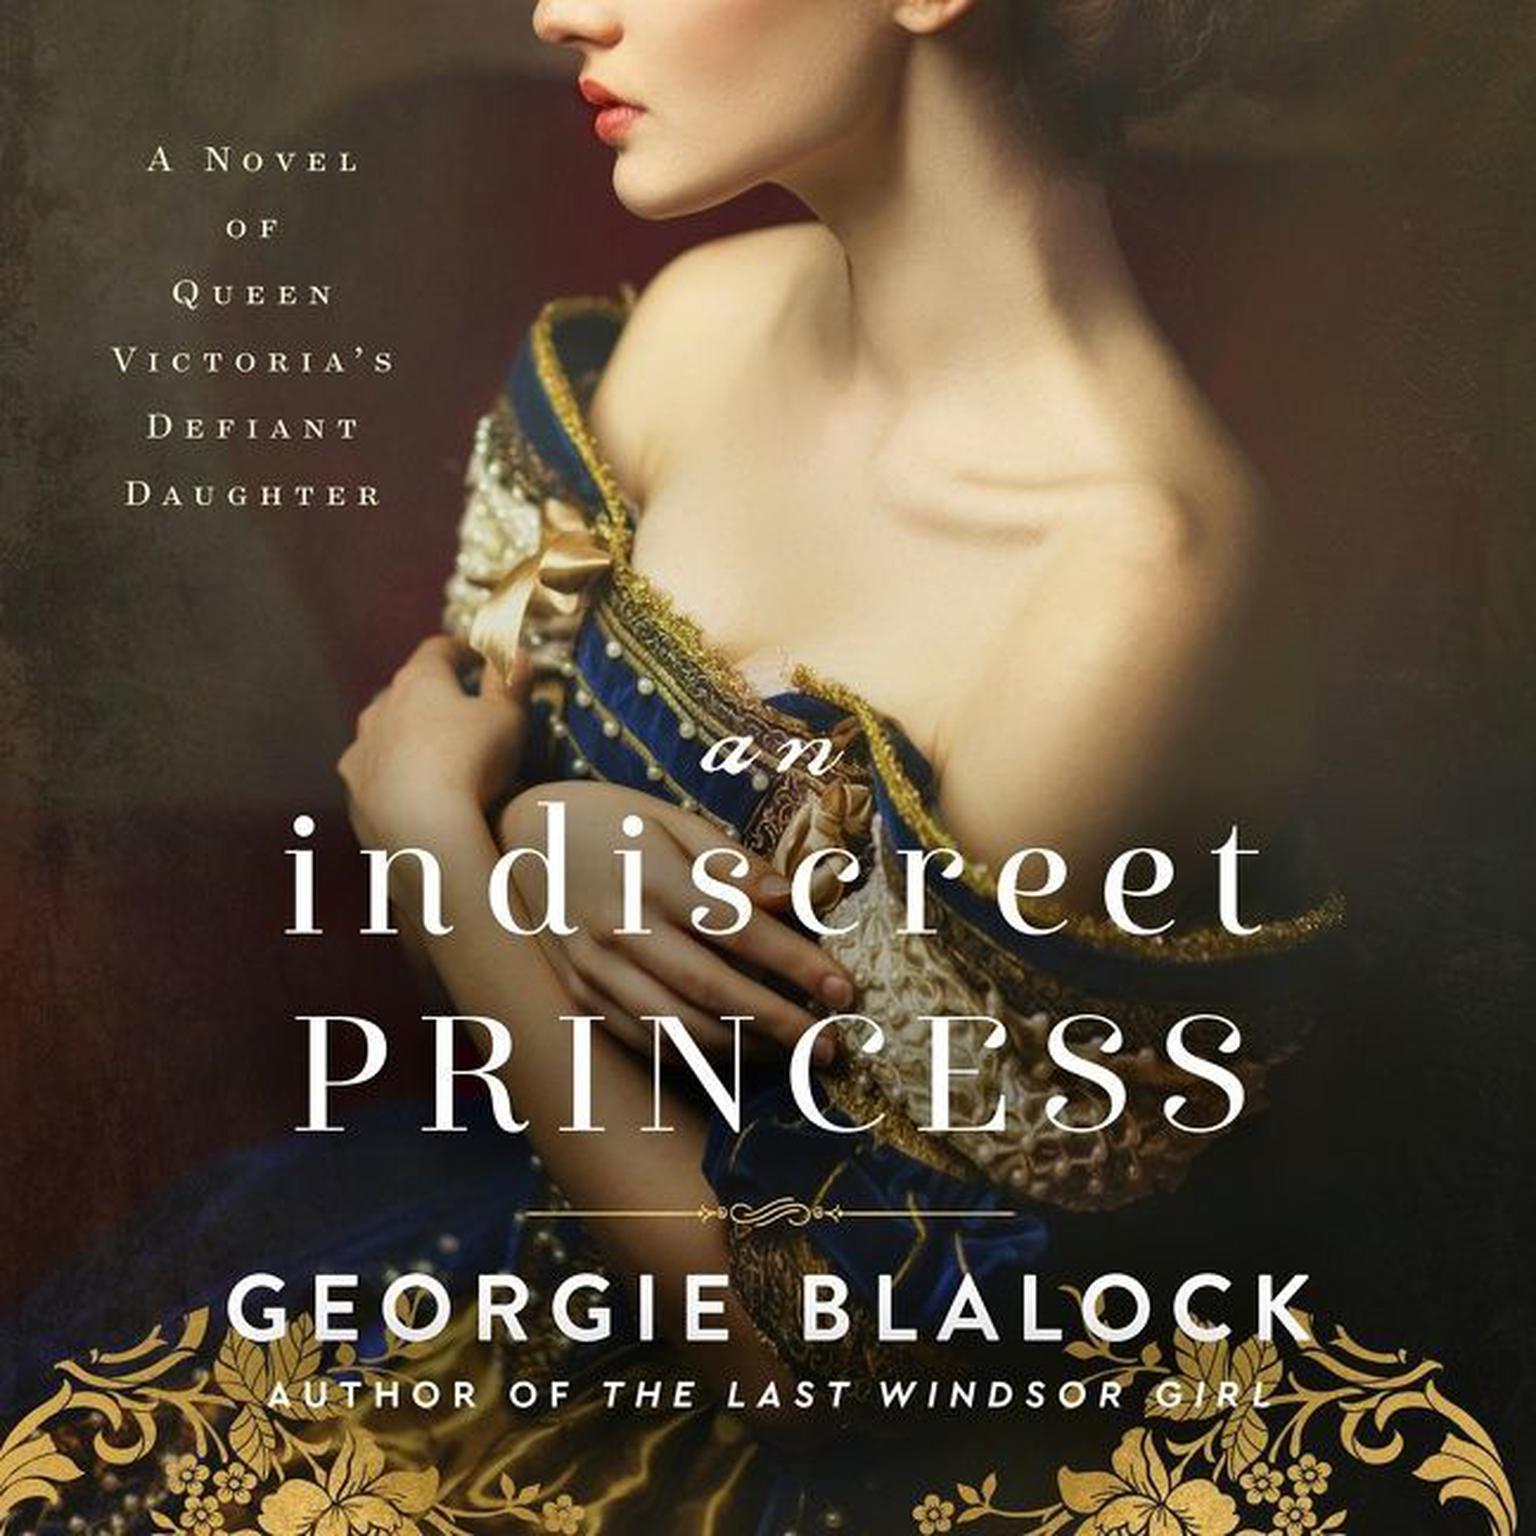 An Indiscreet Princess: A Novel of Queen Victoria’s Defiant Daughter Audiobook, by Georgie Blalock